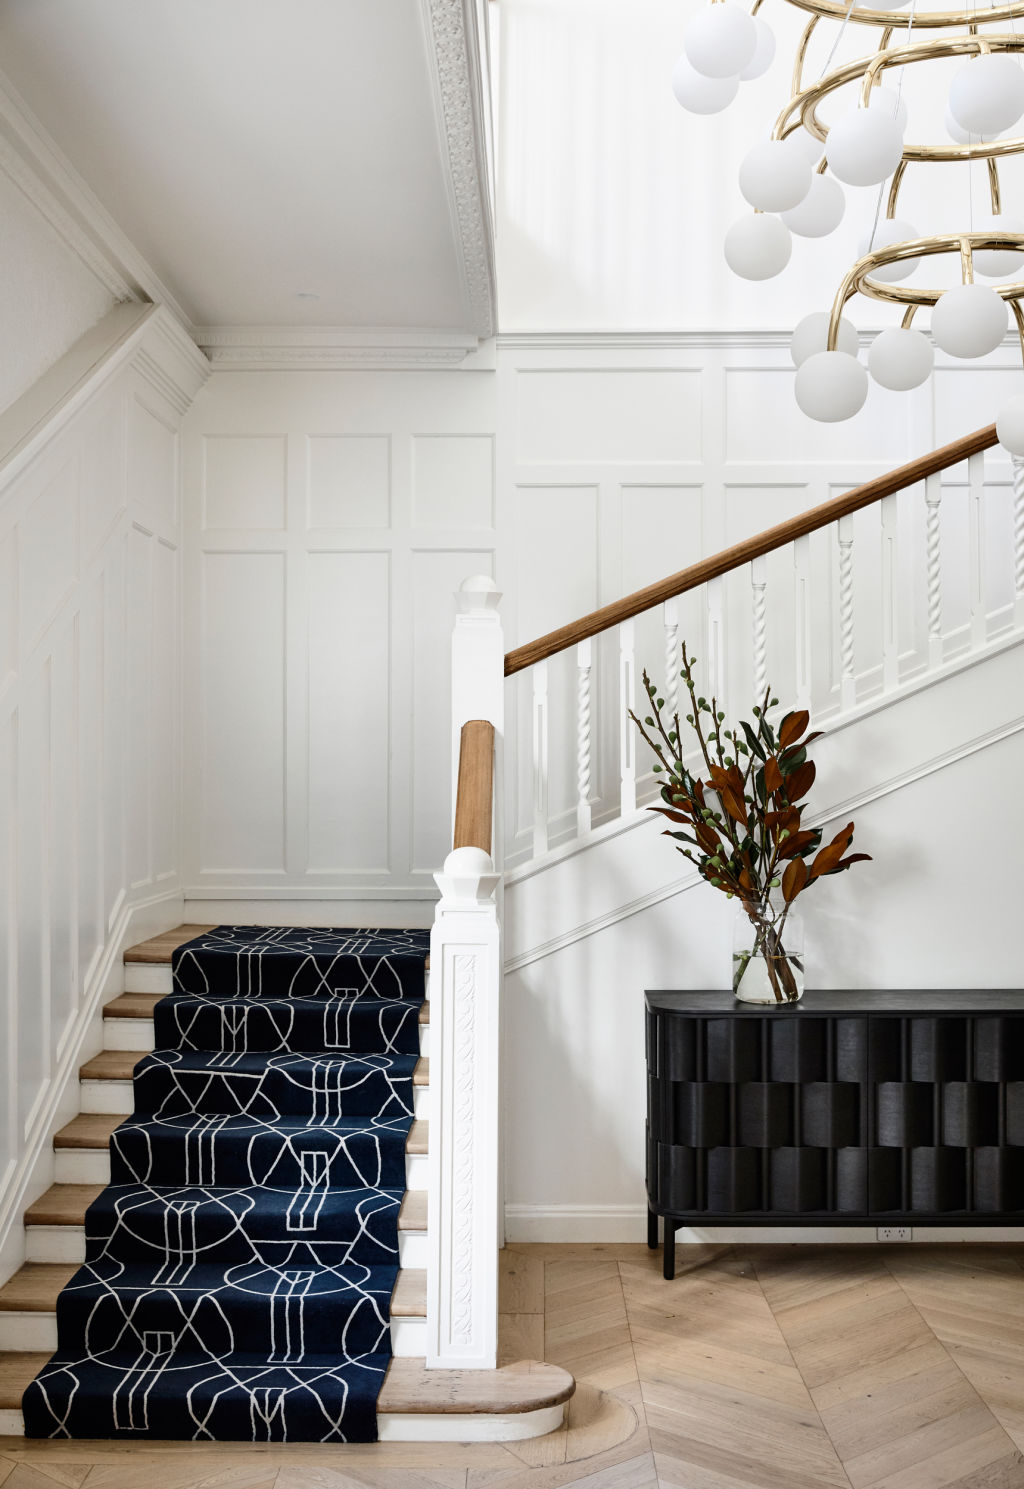 The entryway is a showstopper at the Elwood residence. Photo: Derek Swalwell.